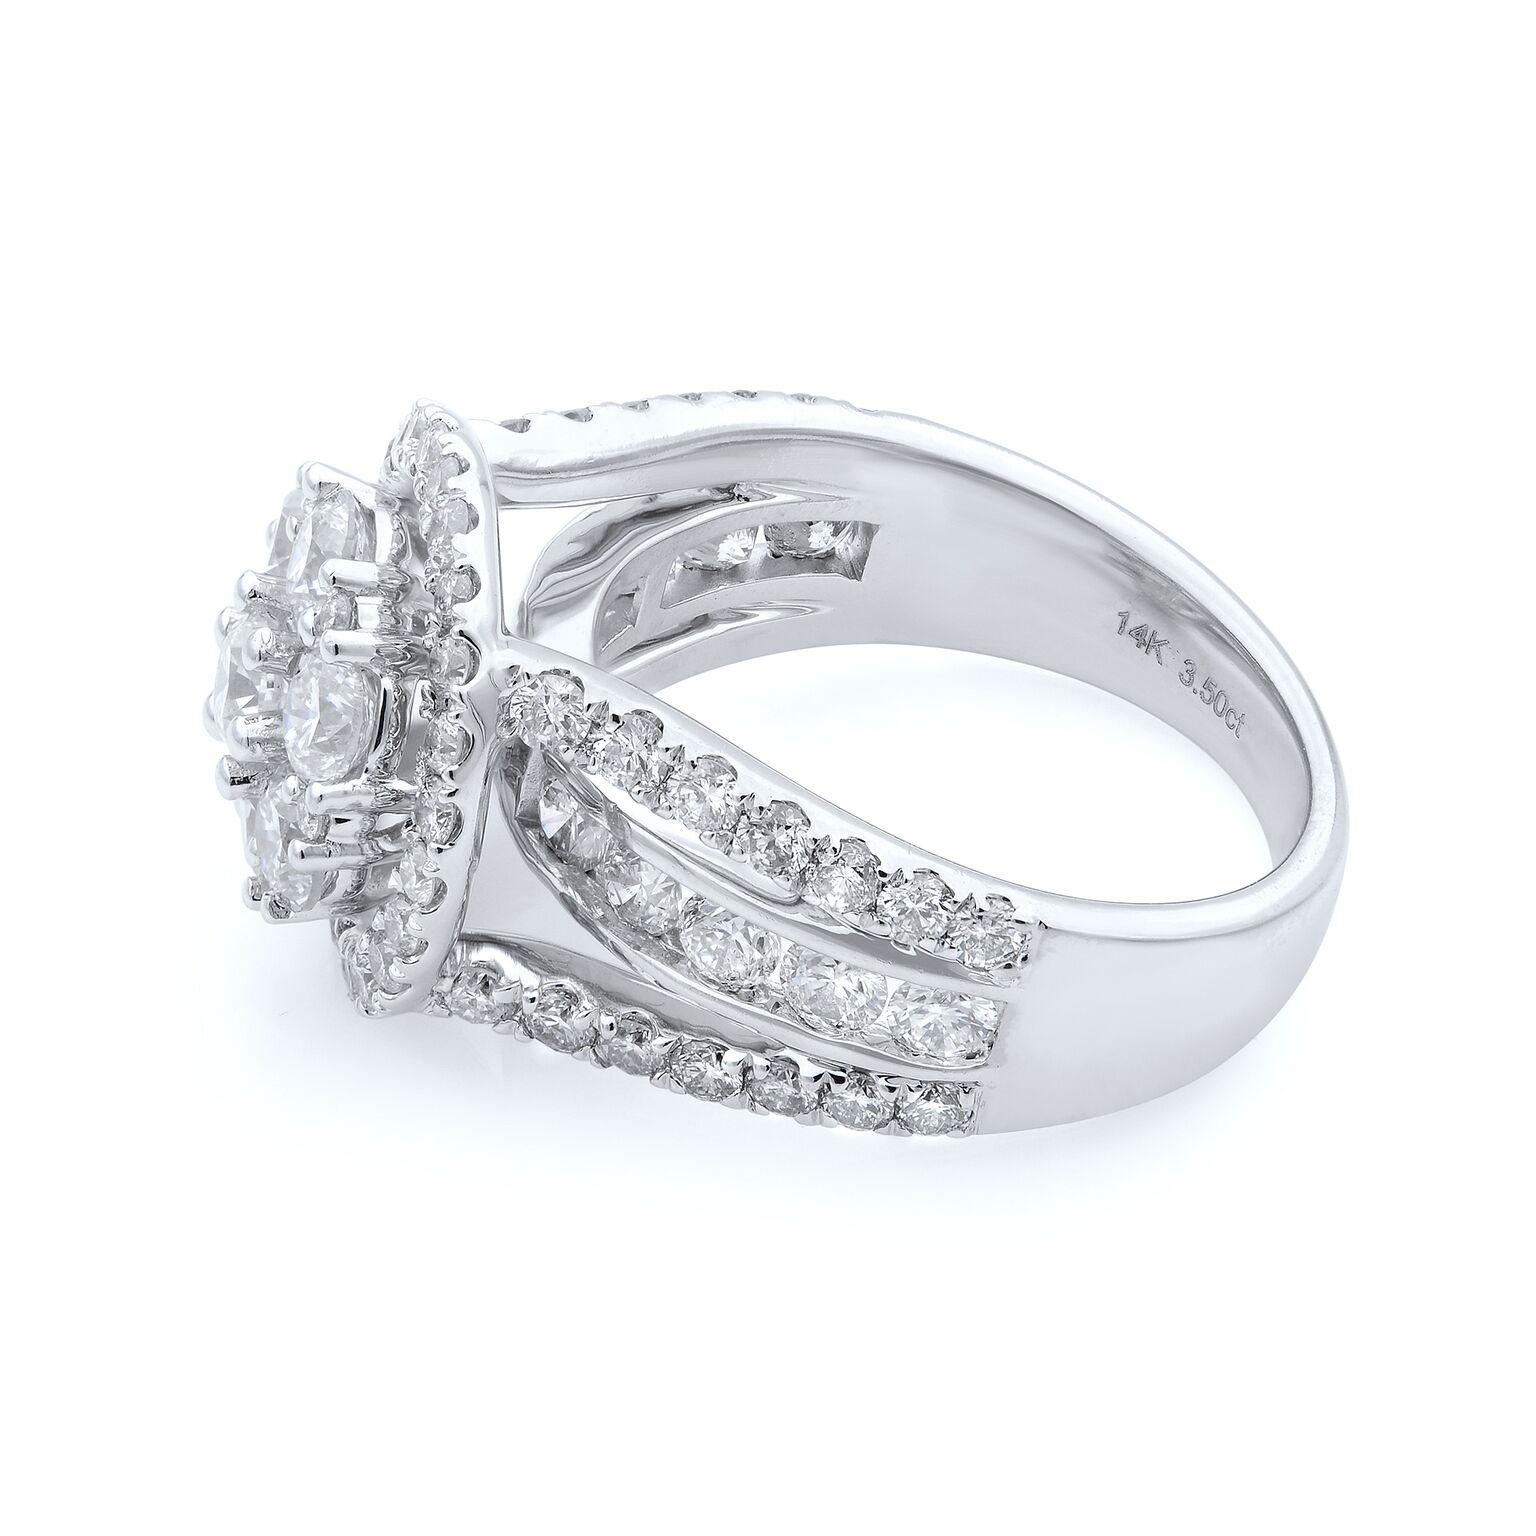 This beautifully cut round brilliant natural diamonds is nestled in diamond encrusted flower motif engagement ring design. The solid 18K white gold setting boasts a 3.50 carat round of diamonds. Diamonds are VS1 clarity and G color. Ring size 7.